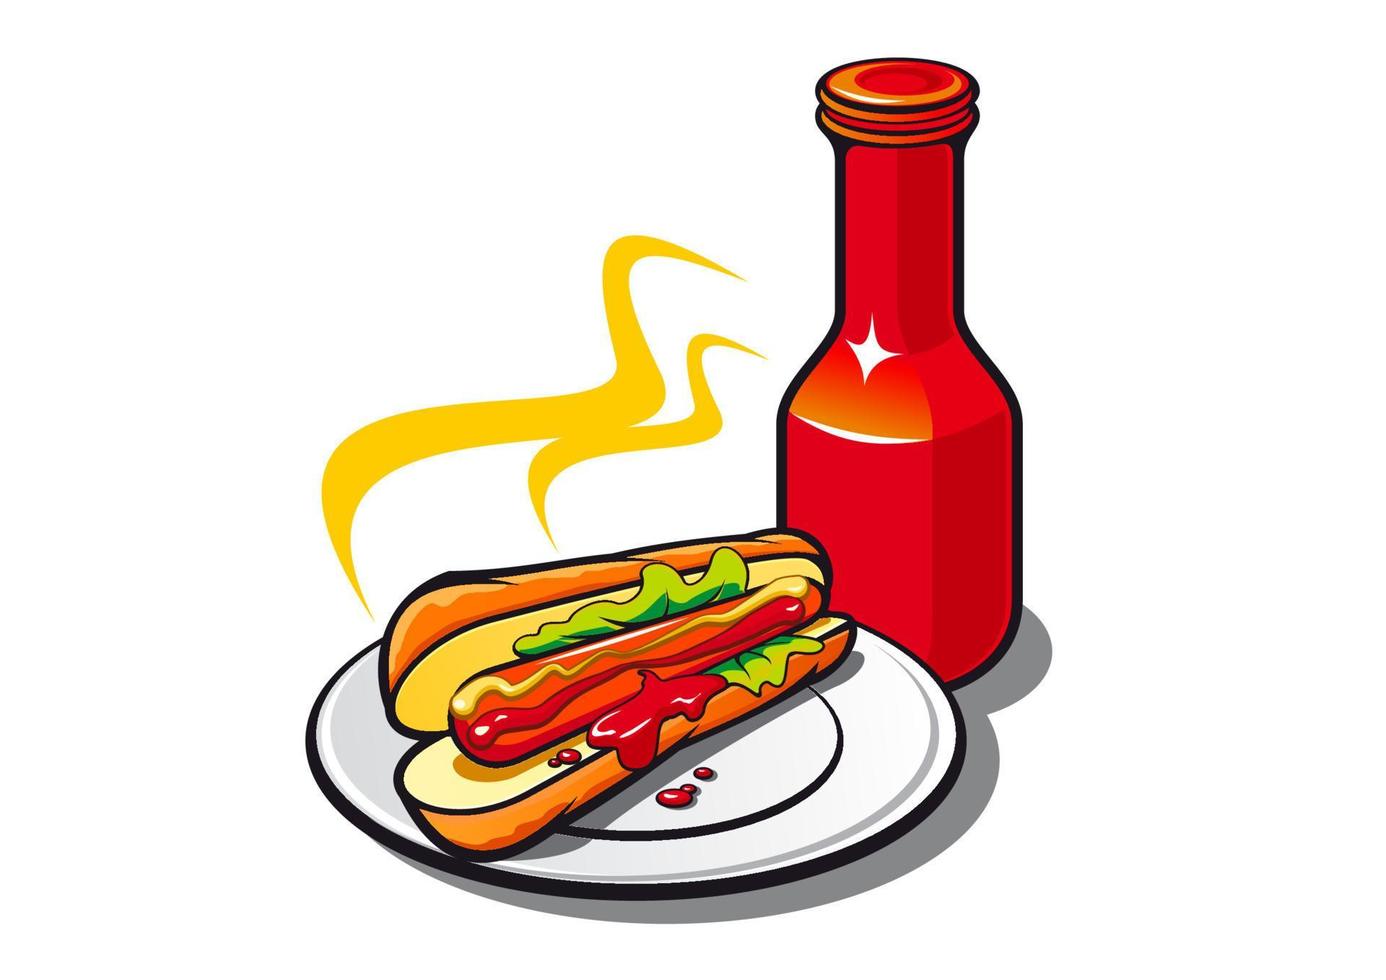 Appetizing hotdog with ketchup vector